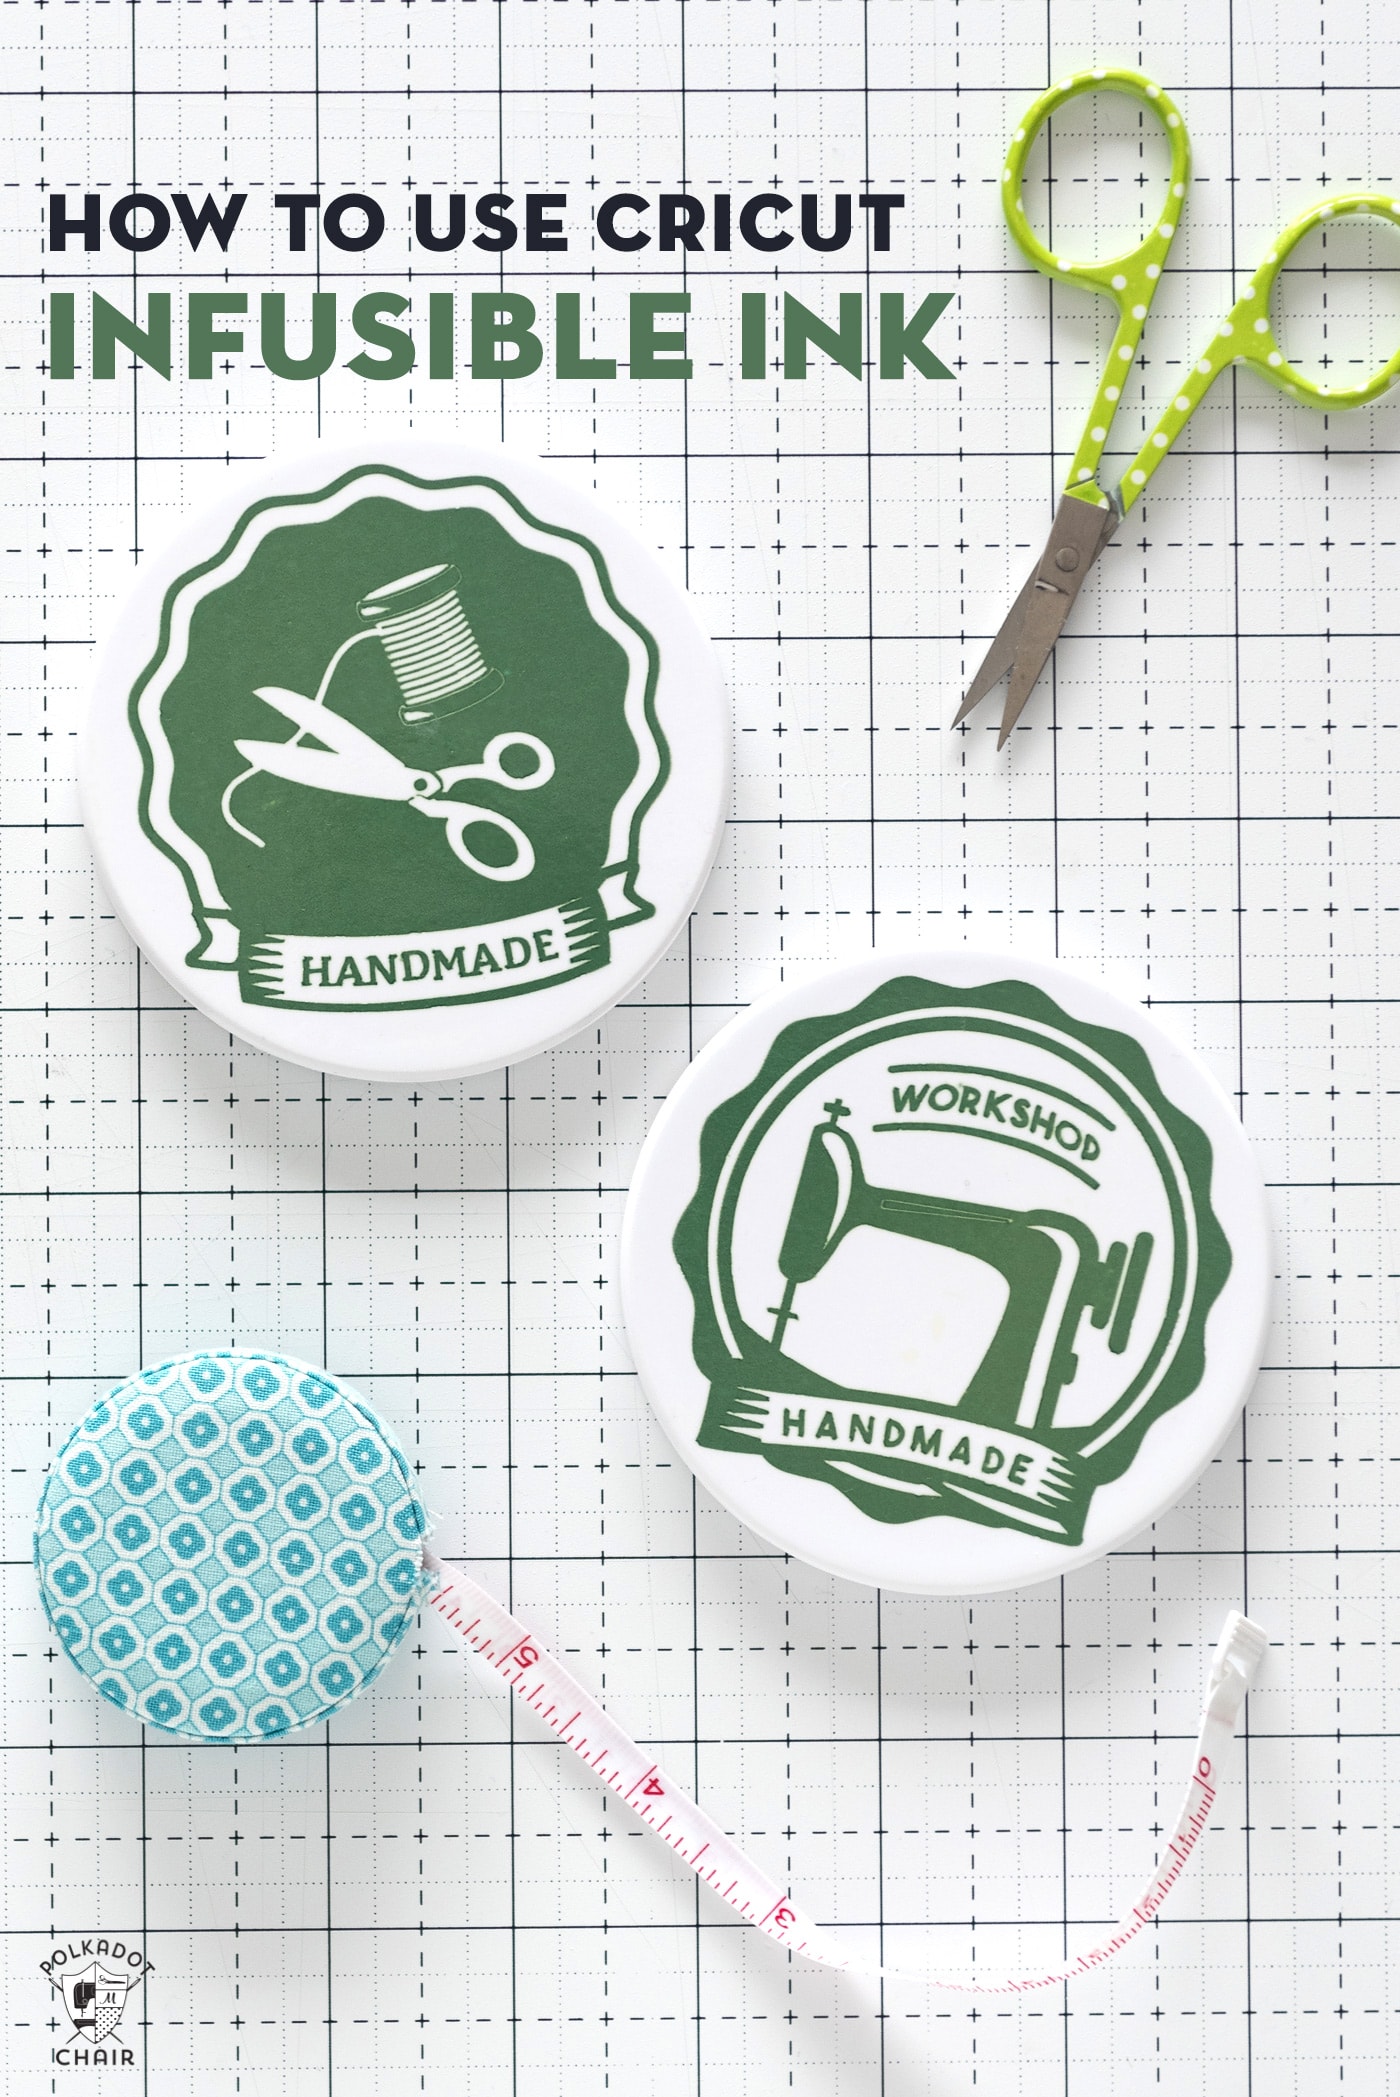 How to use Cricut Infusible Ink